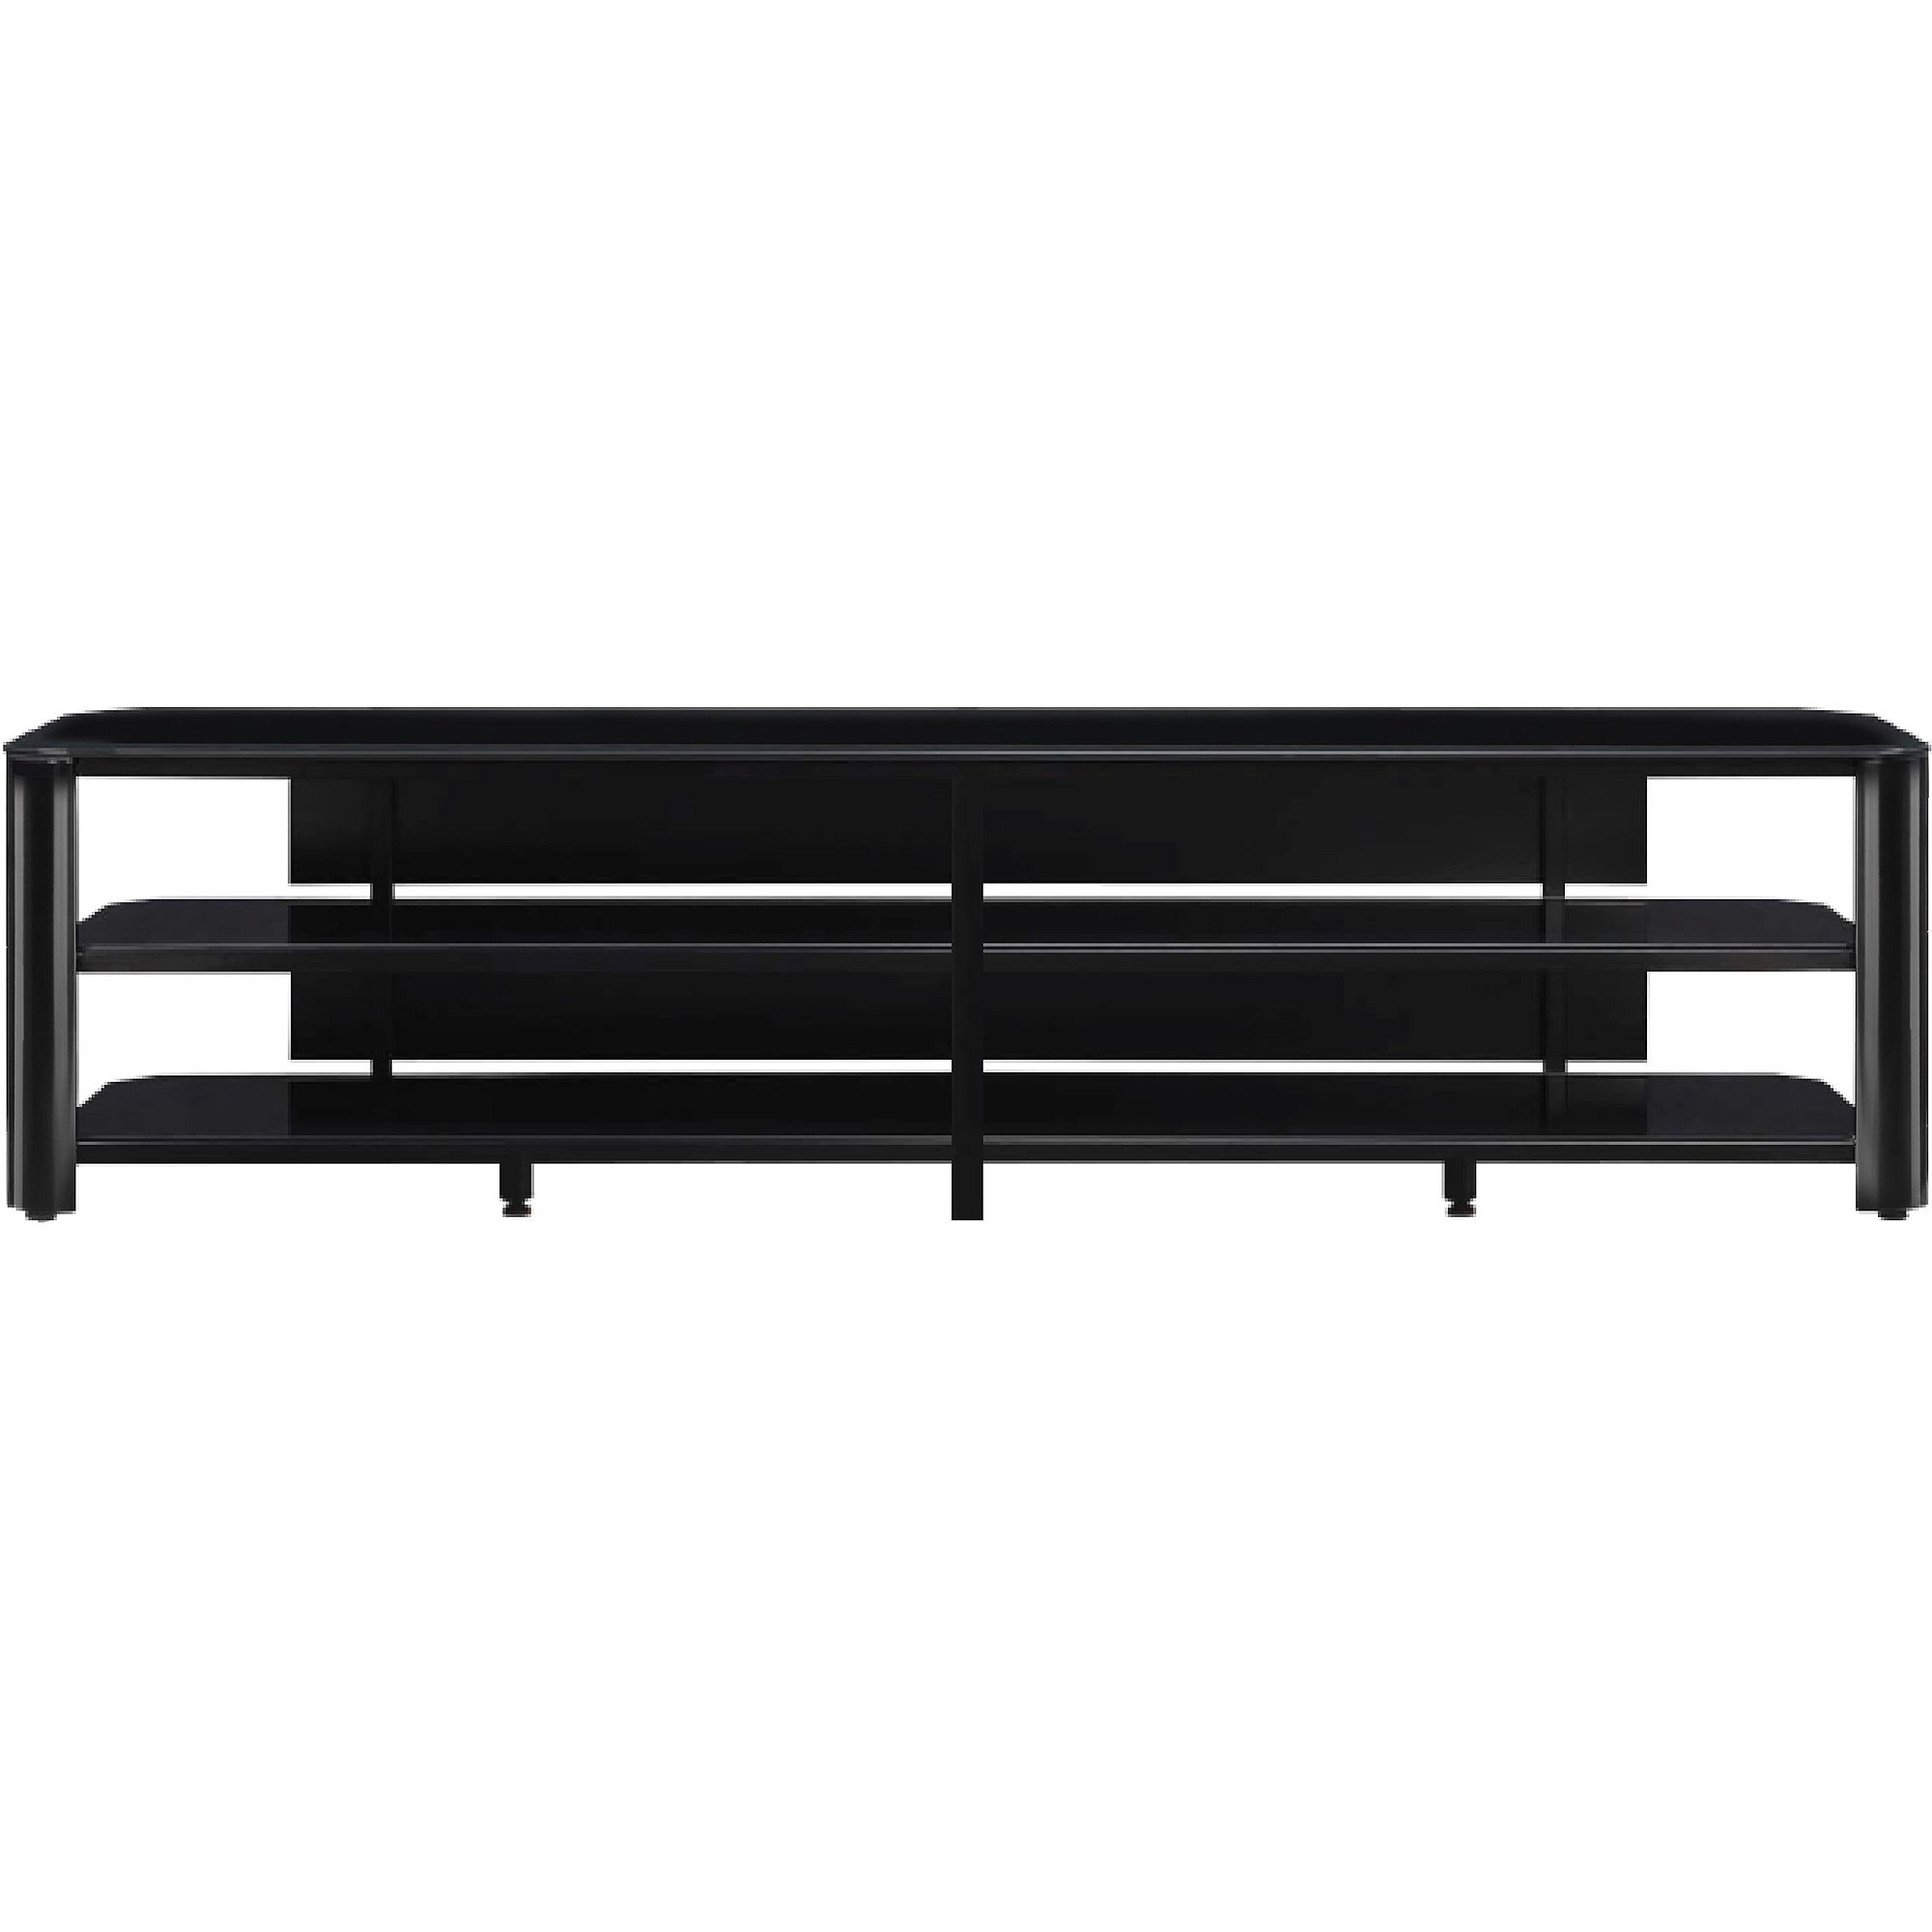 Innovex Oxford Glass Black Tv Stand For Tvs Up To 83" – Walmart Regarding Most Up To Date Oxford 84 Inch Tv Stands (View 18 of 20)